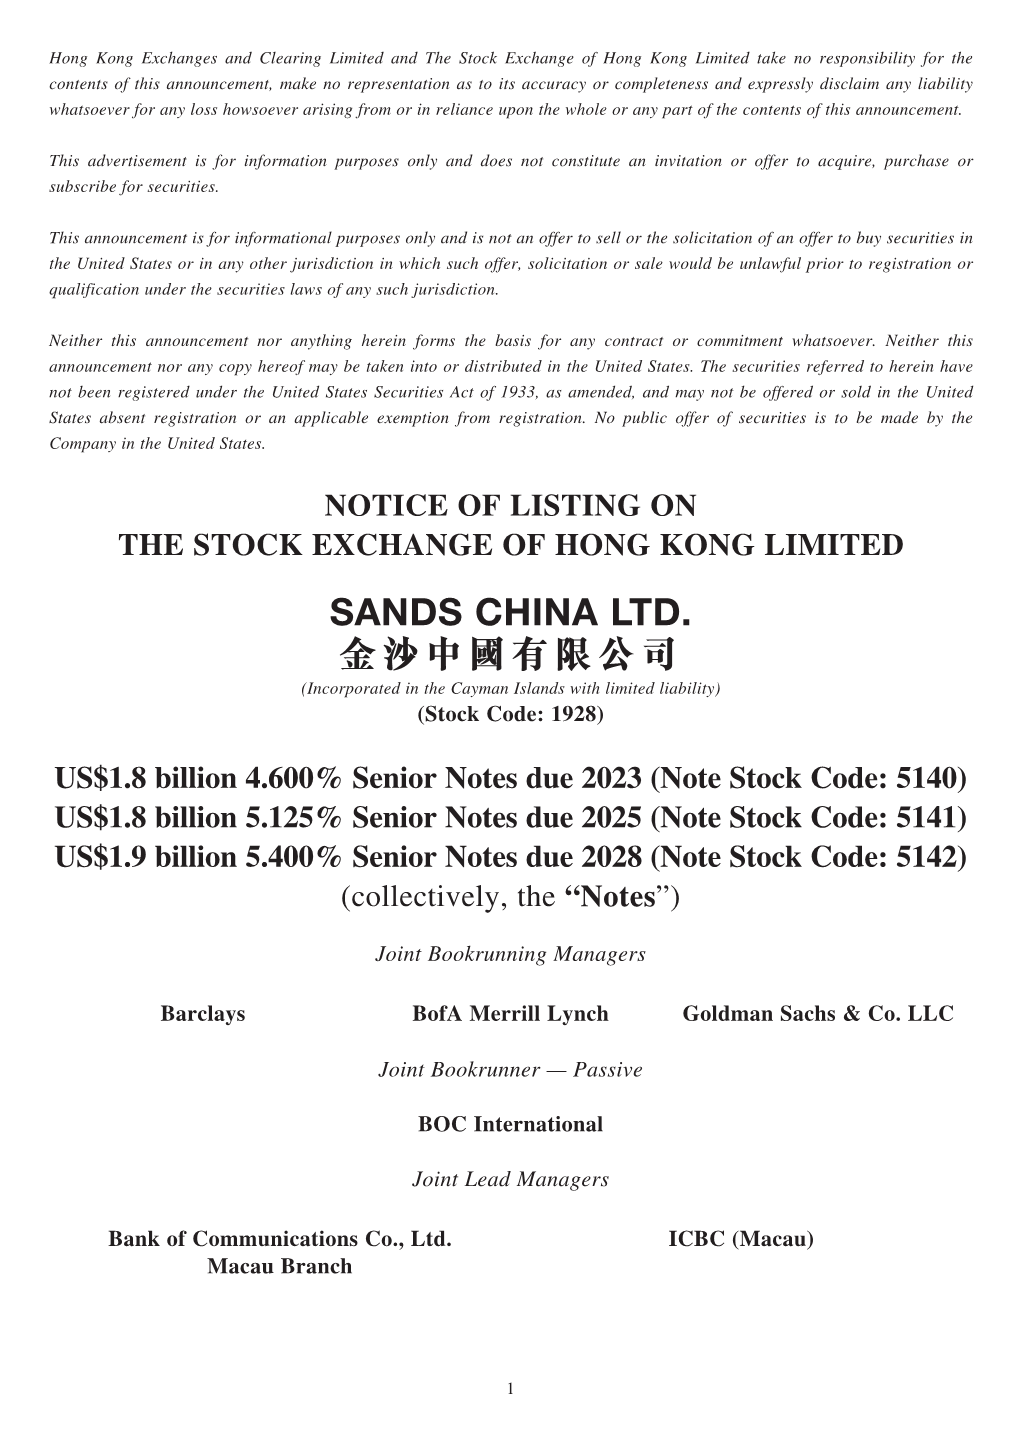 SANDS CHINA LTD. 金沙中國有限公司 (Incorporated in the Cayman Islands with Limited Liability) (Stock Code: 1928)